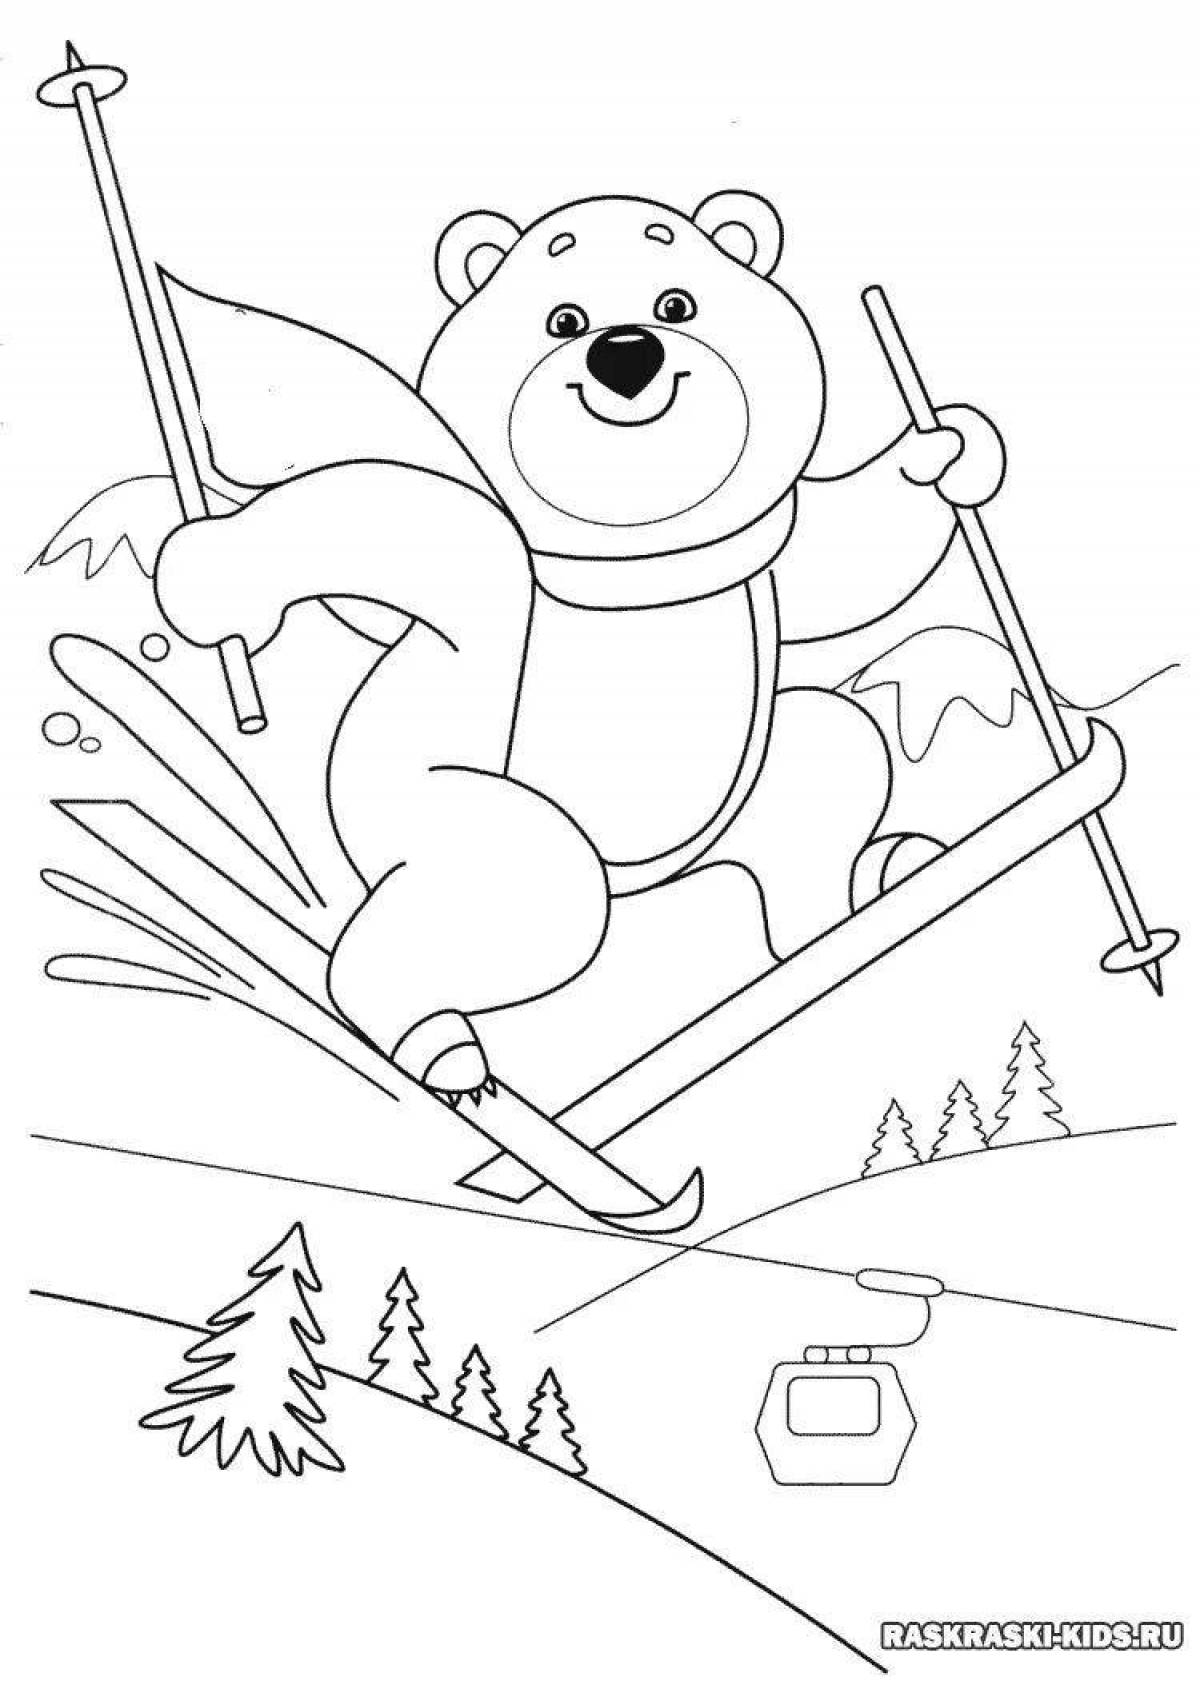 Coloring page energetic olympic bear